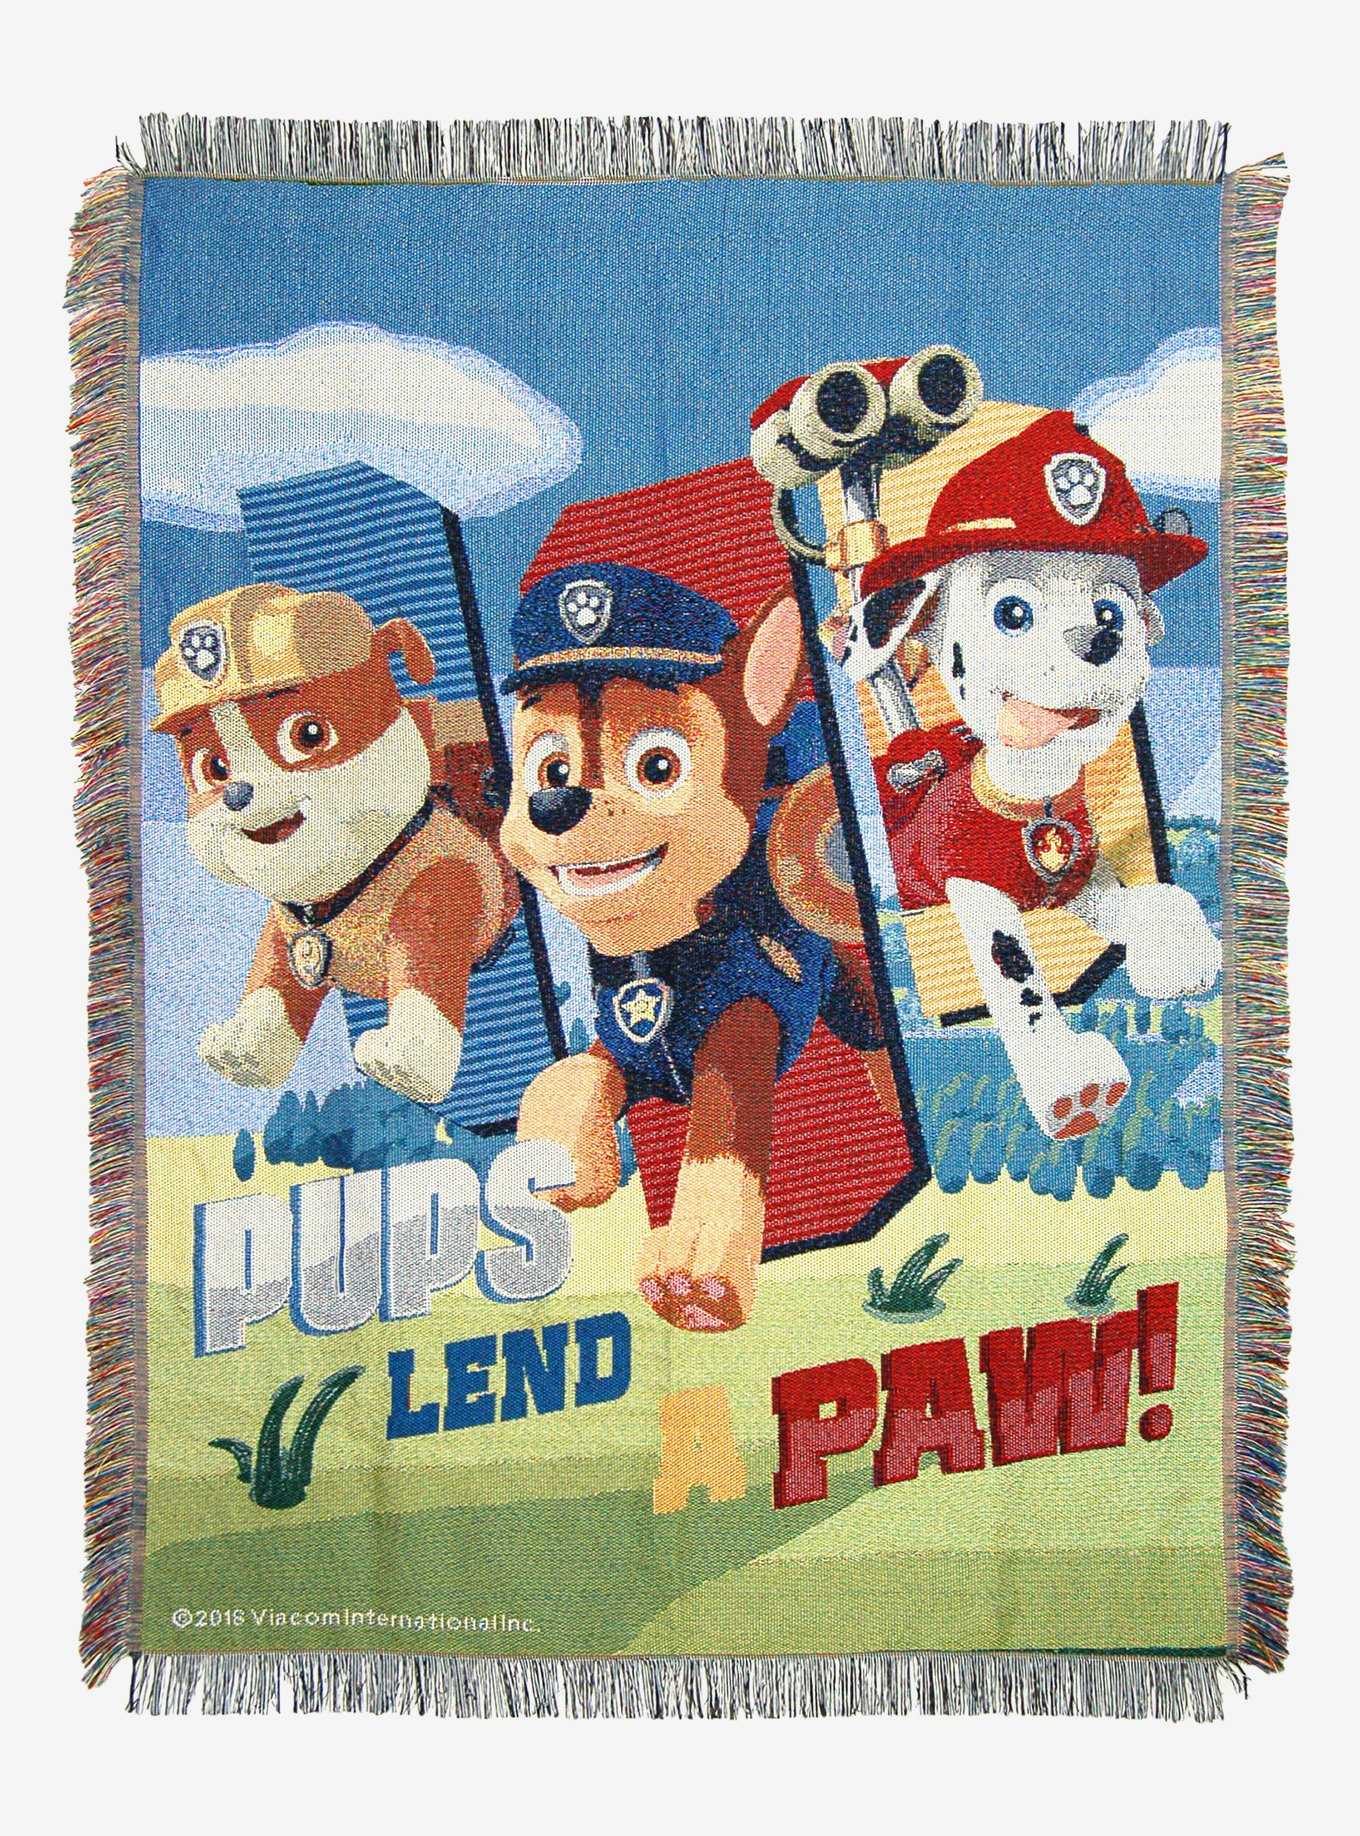 Nickelodeon Paw Patrol Lend A Paw Woven Tapestry Throw Blanket, , hi-res